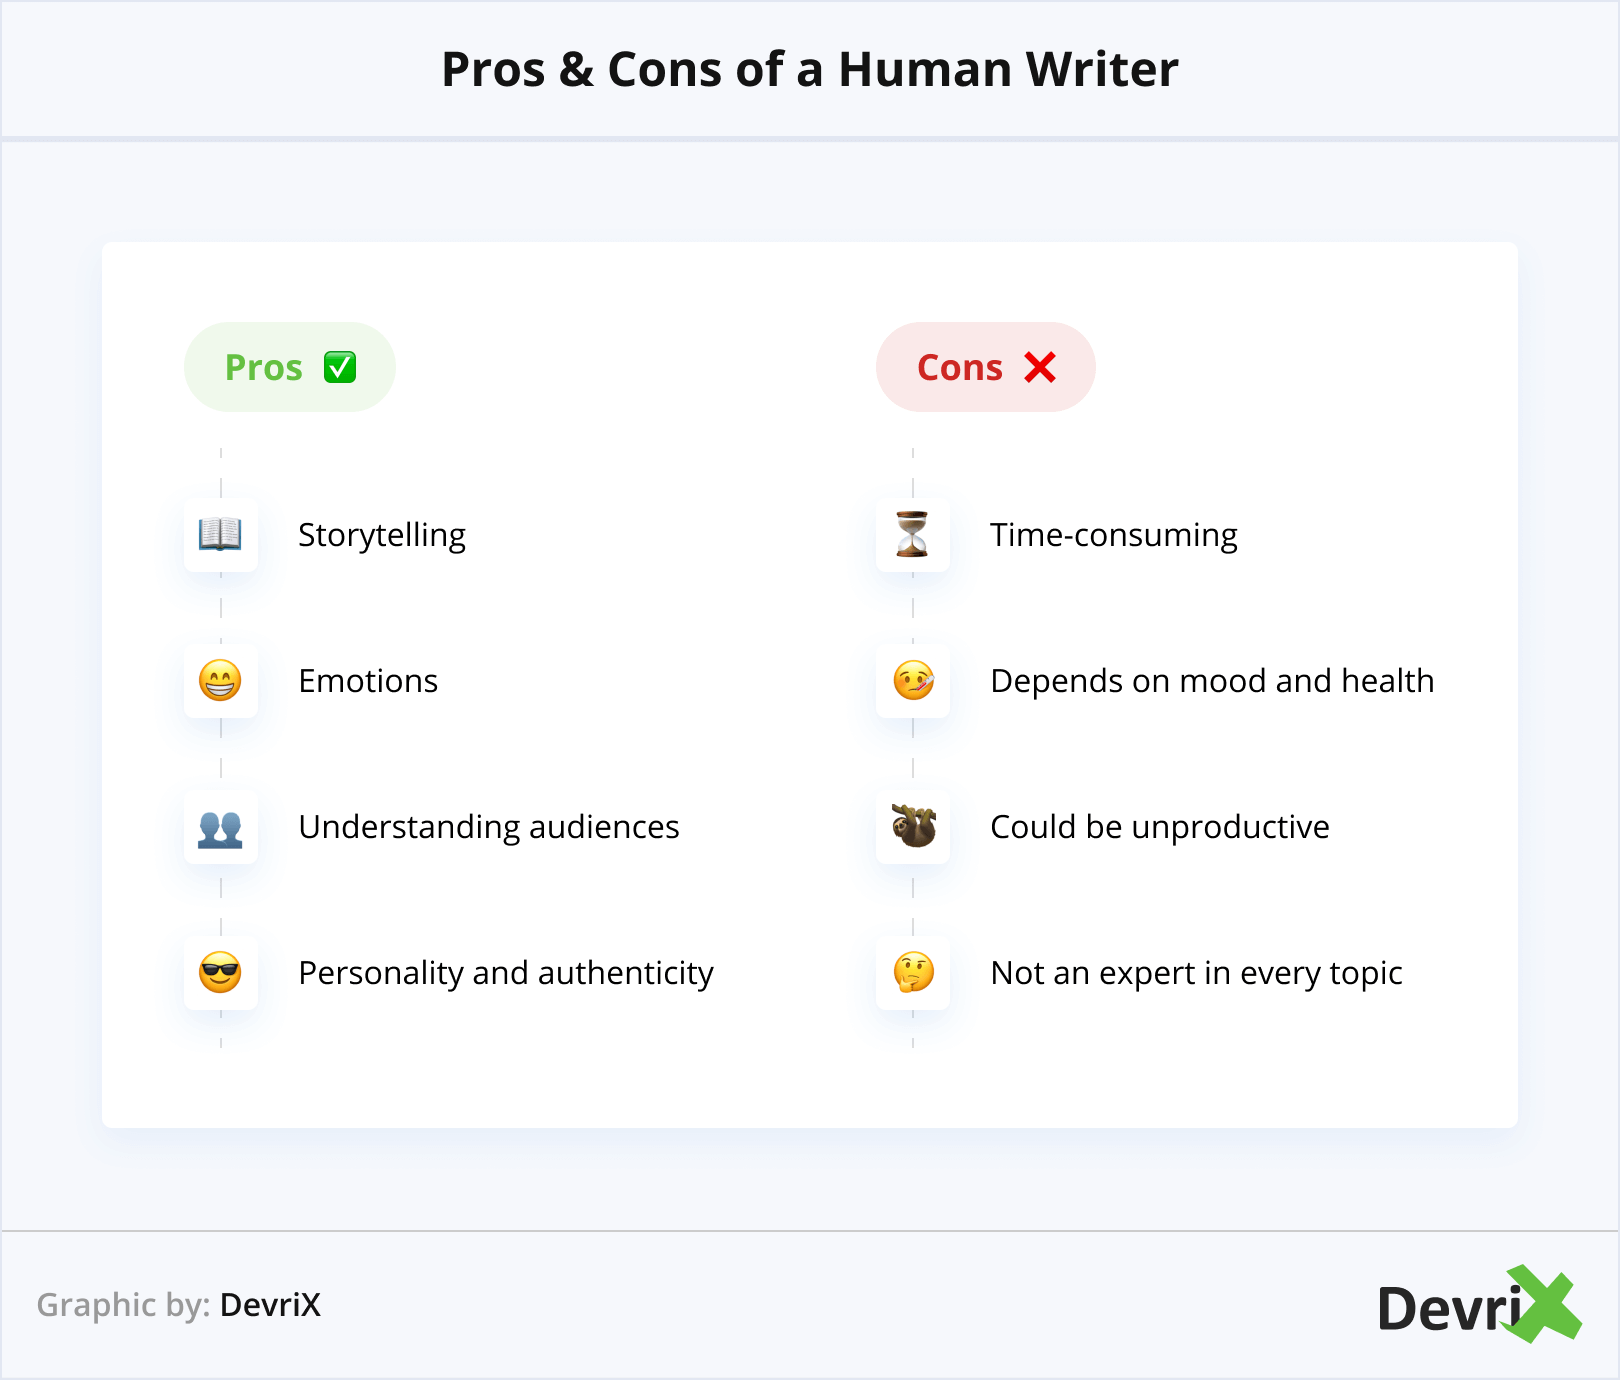 Pros & Cons of a Human Writer